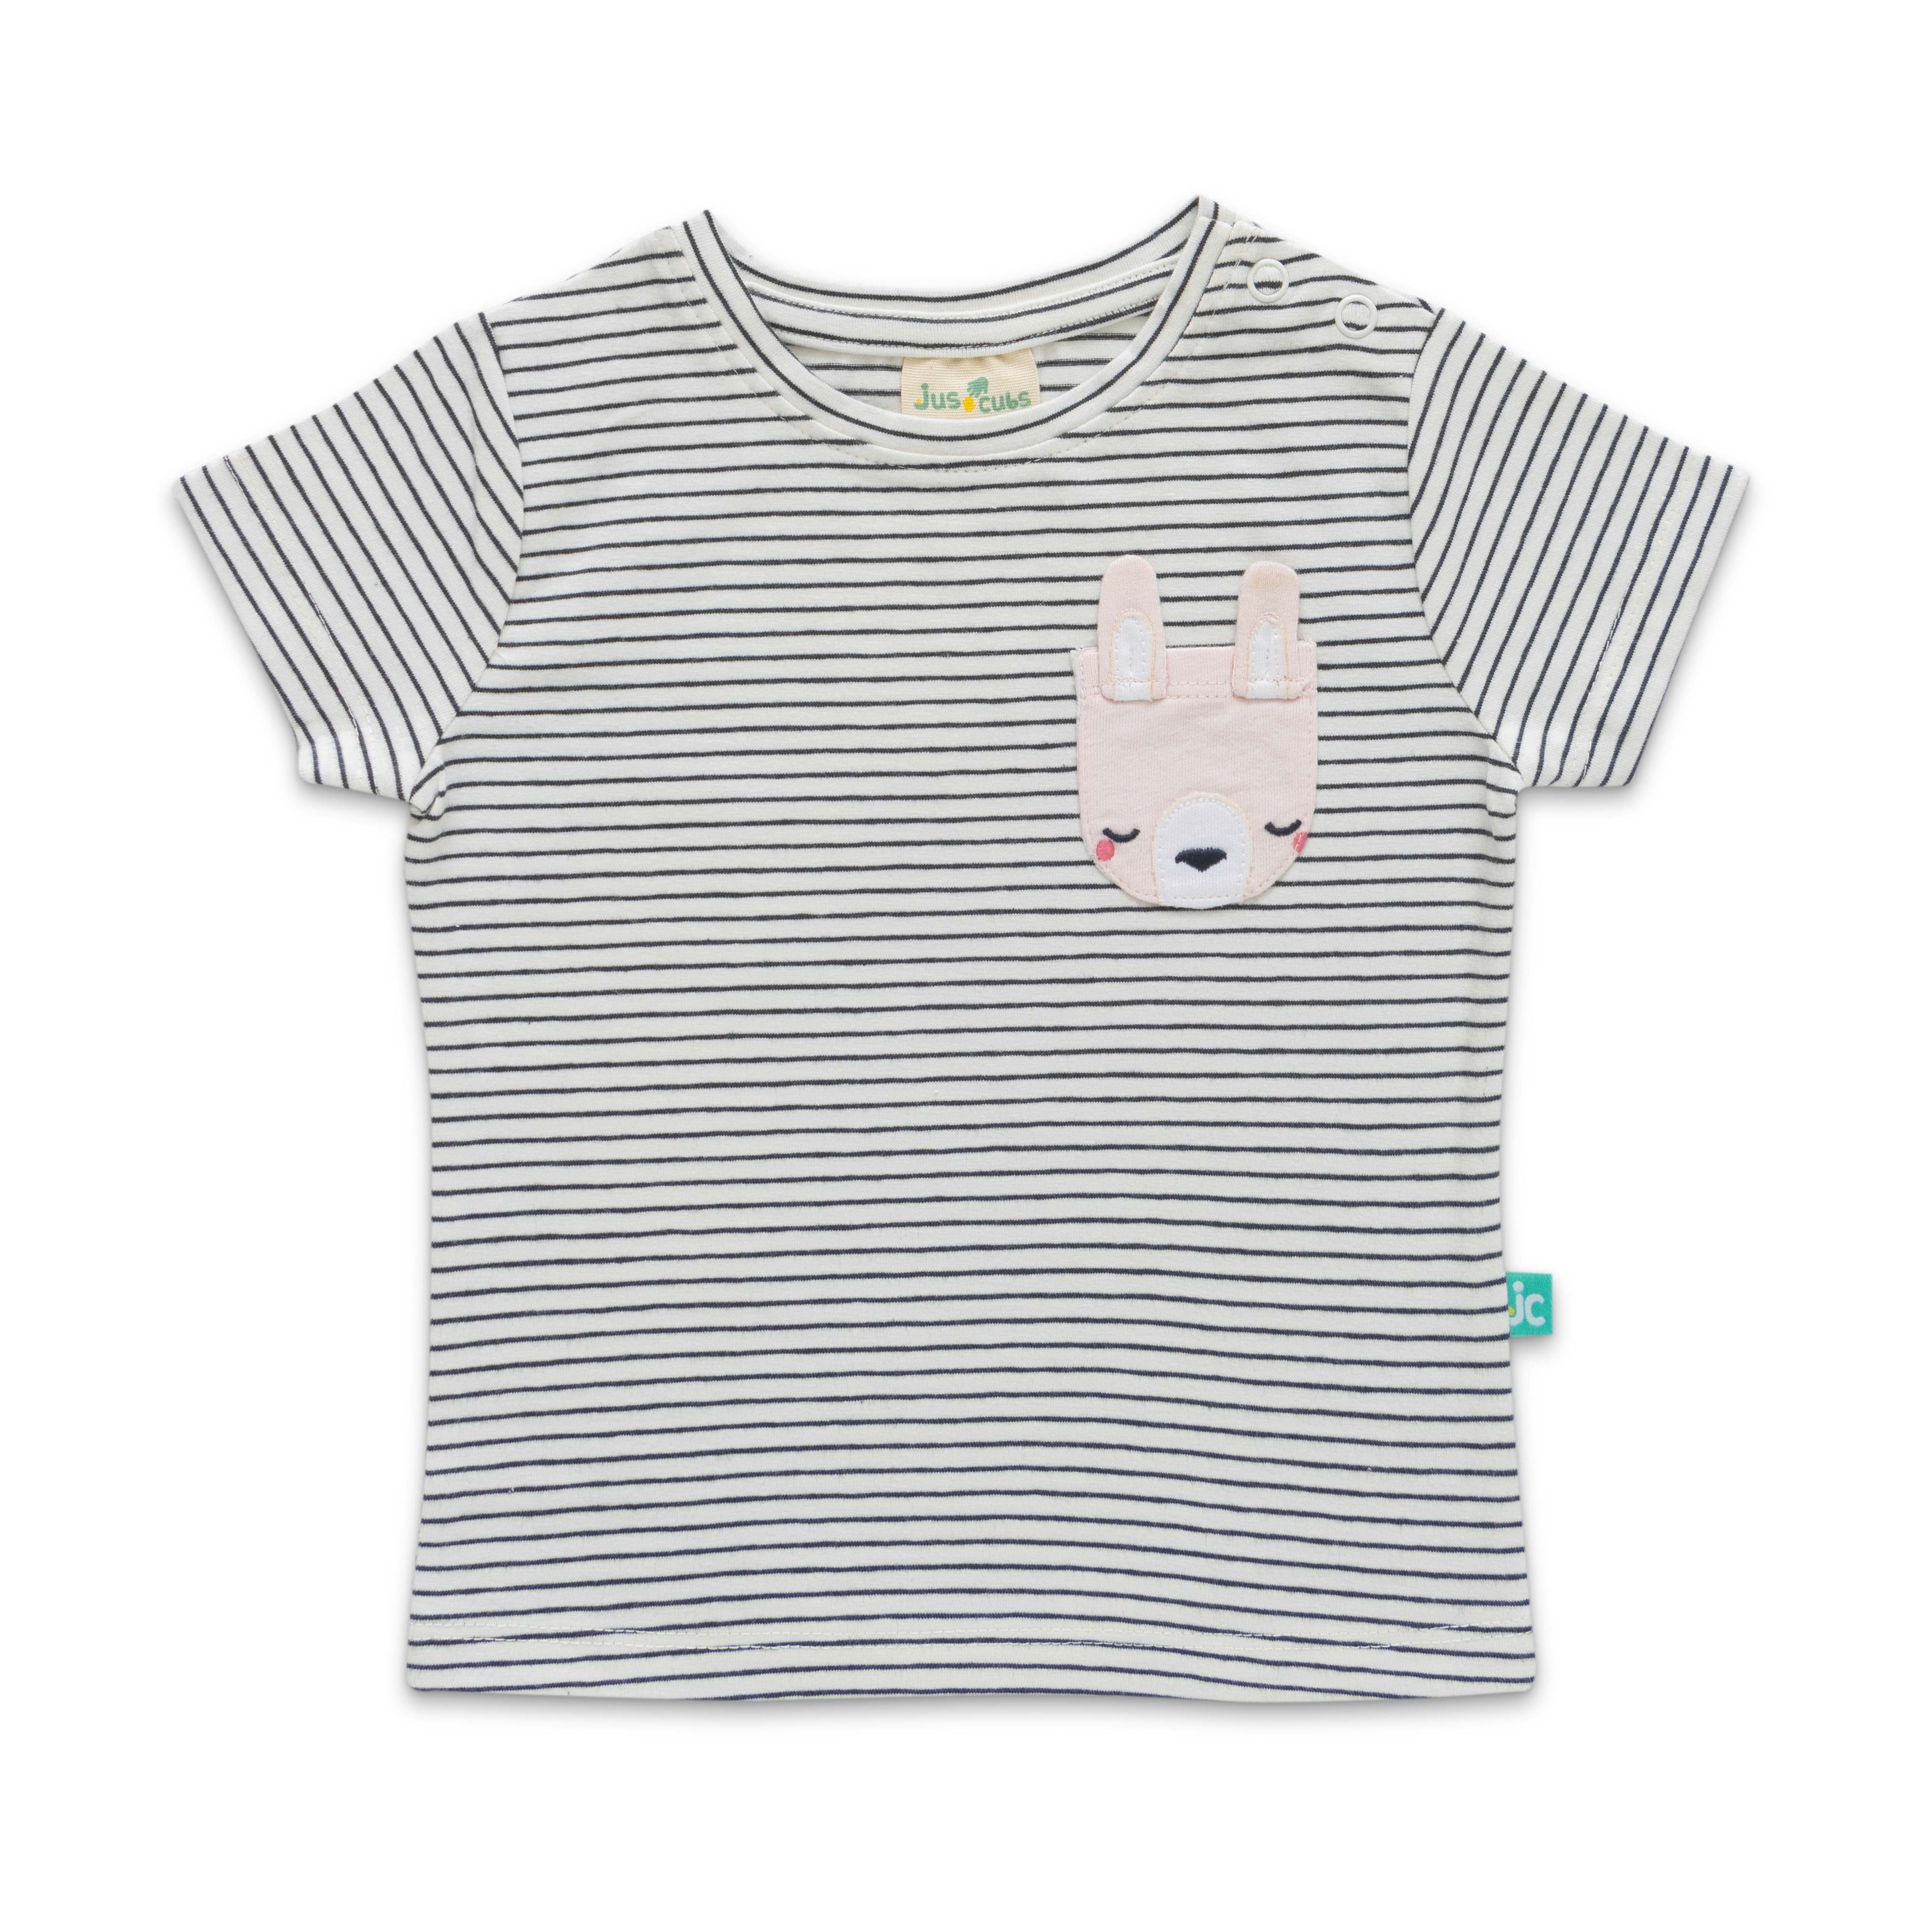 Infant Girls Striped Pure Cotton T-shirt with Shorts-Yellow & Black